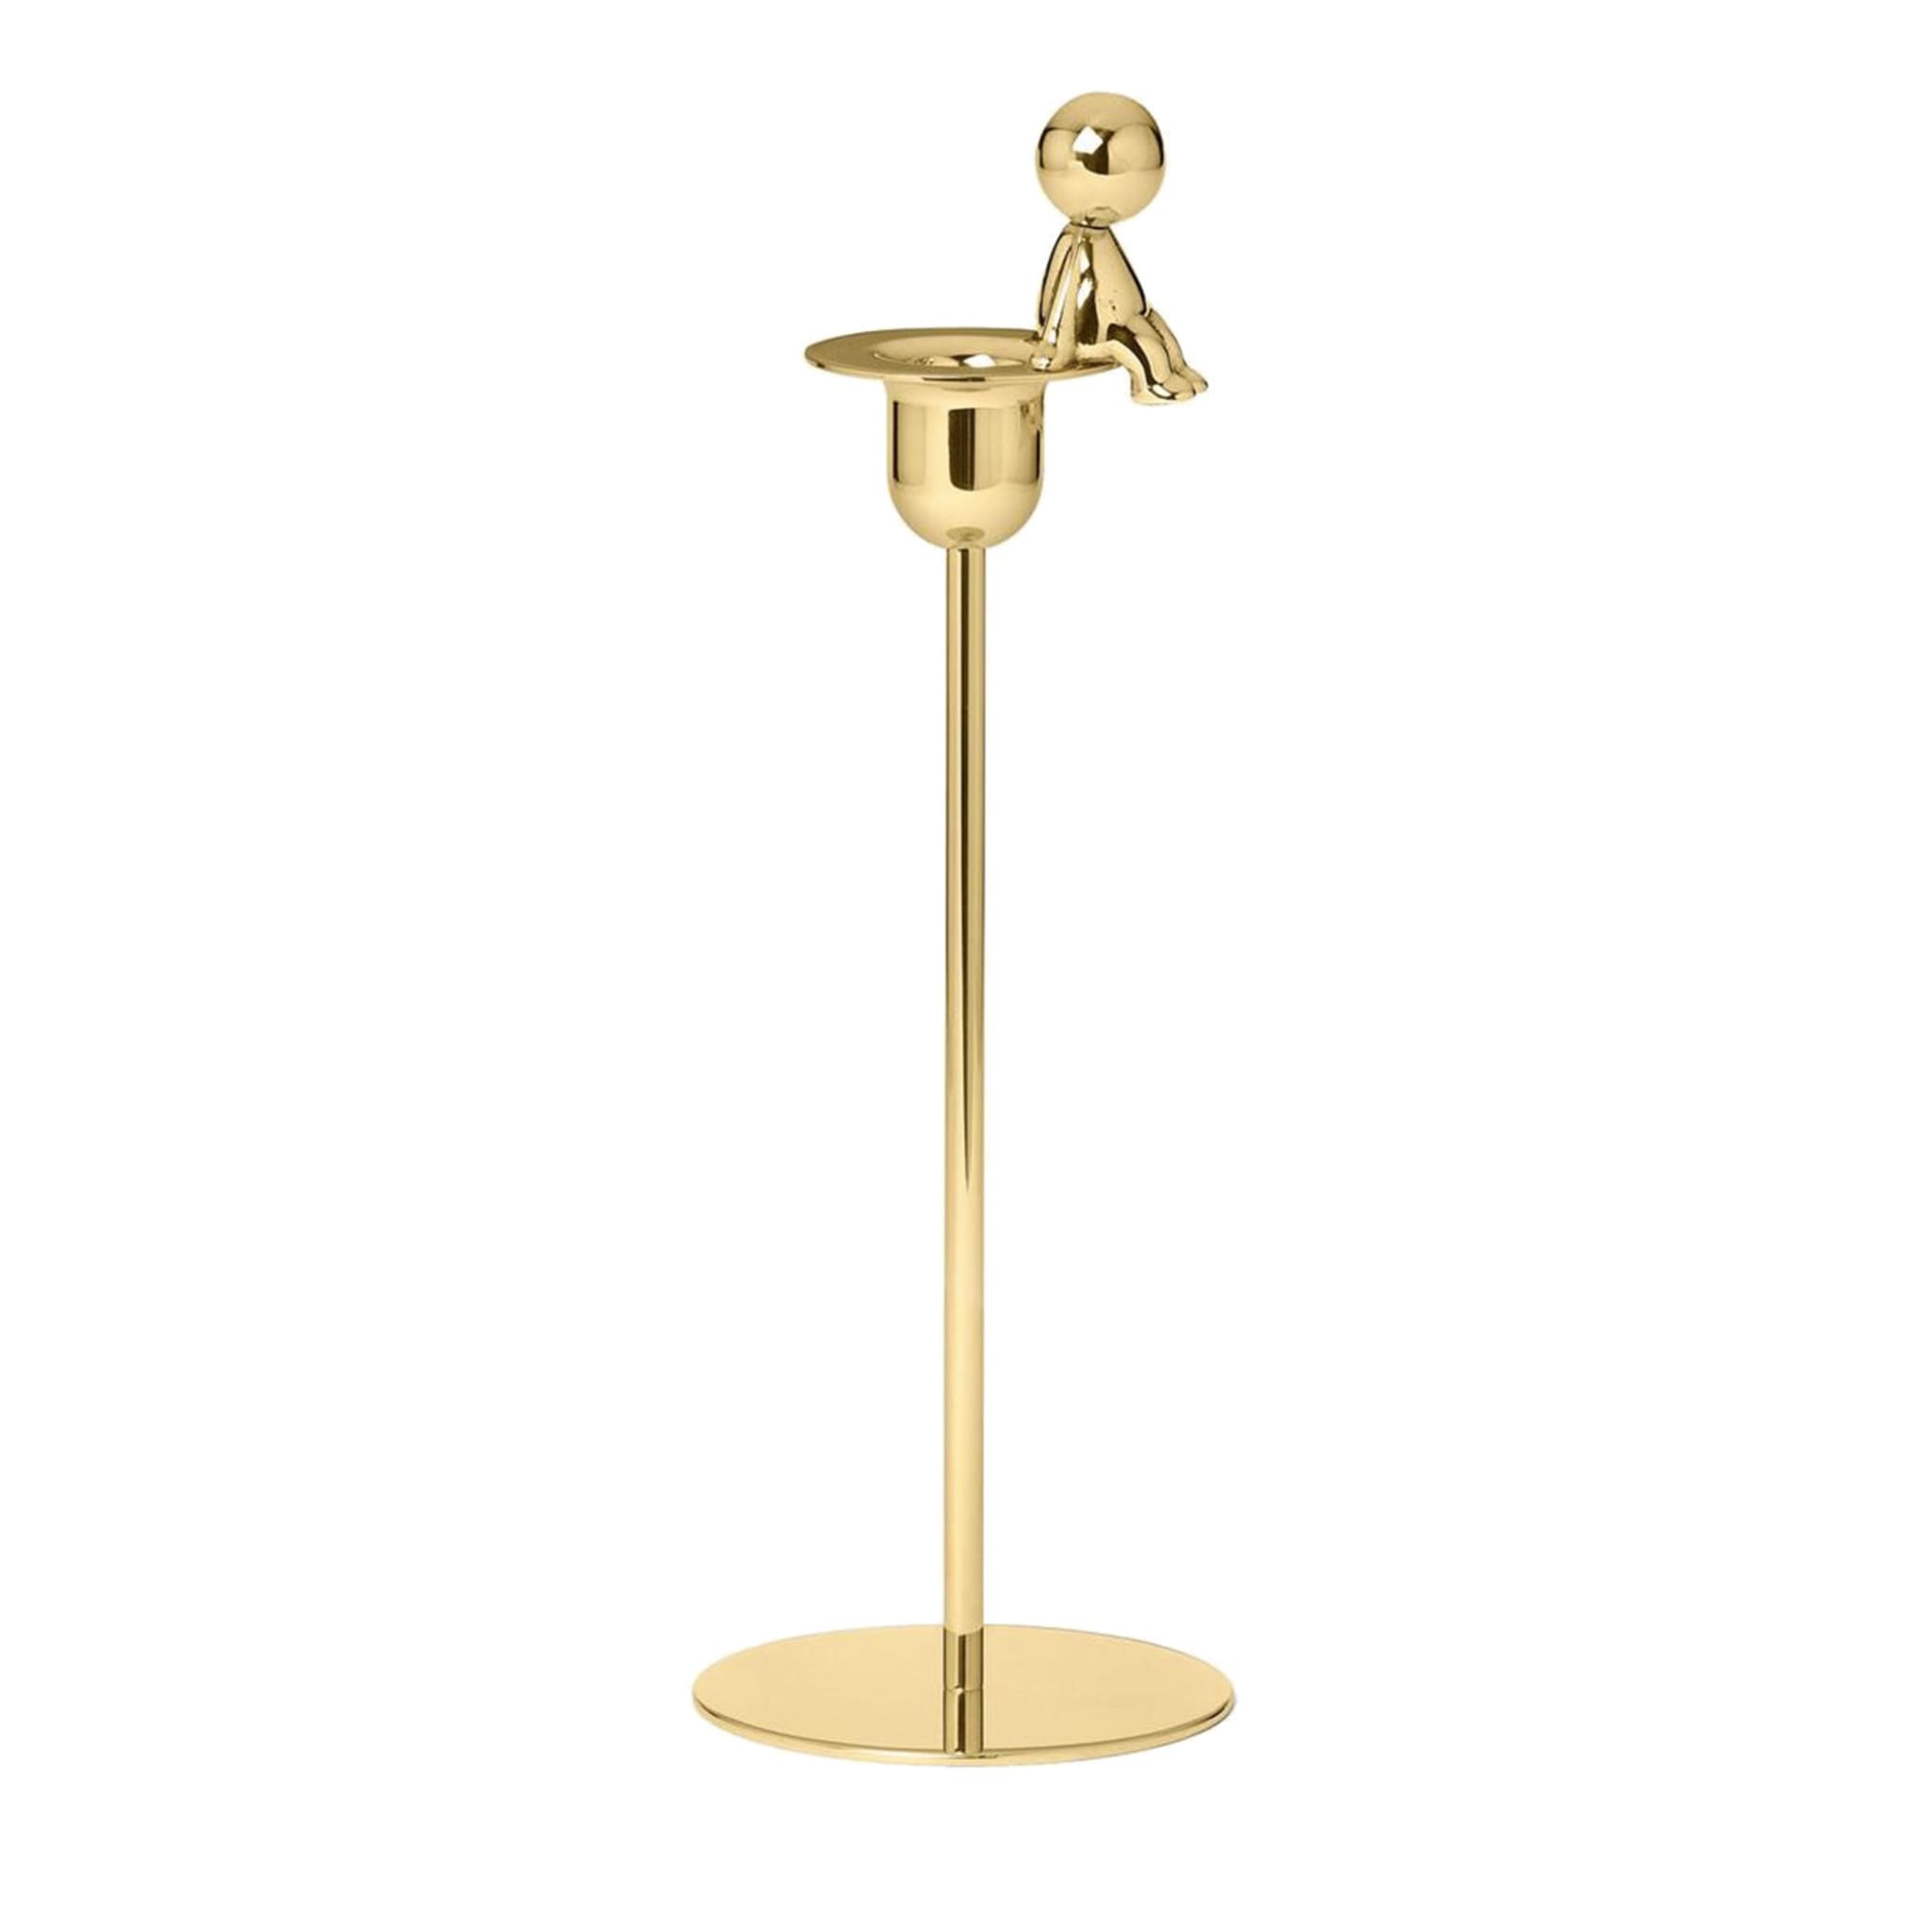 Omini Thinker Tall Candlestick in Polished Brass By Stefano Giovannoni - Main view